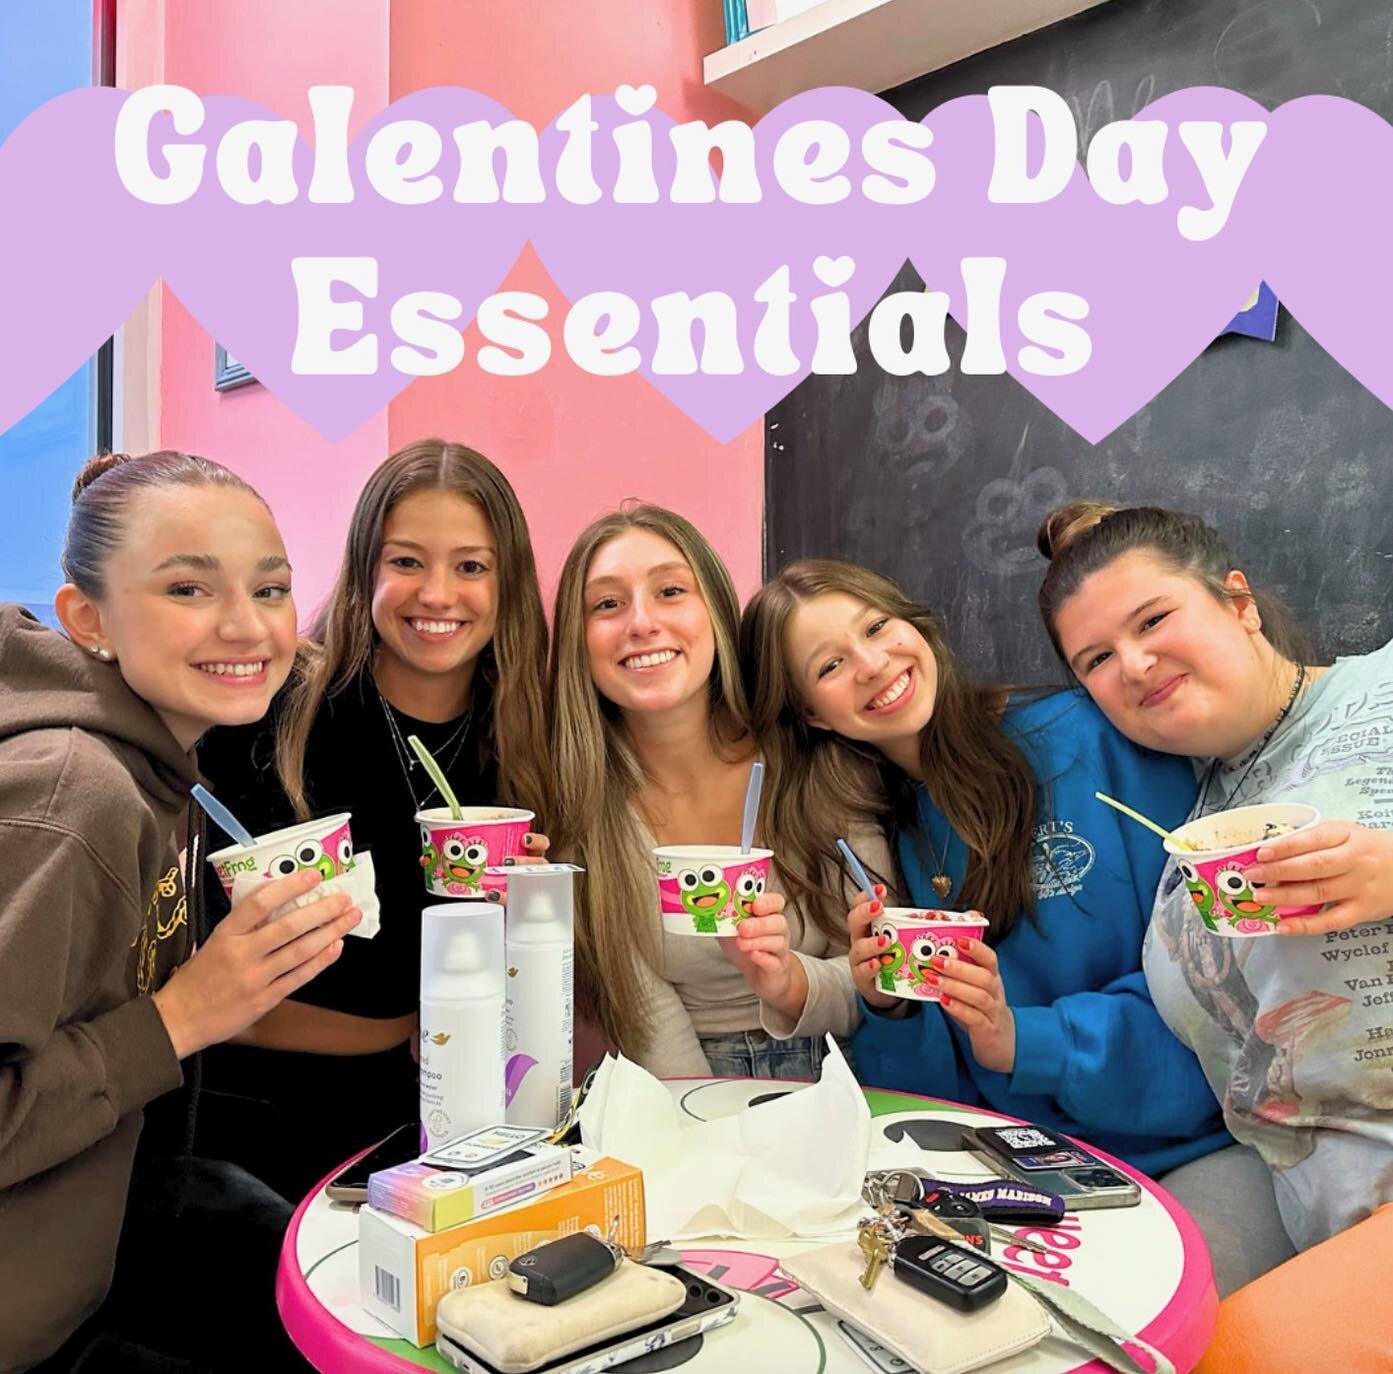 So many products to LOVE 💖
✨
Student Made has all the products you need for the perfect Galentines Day this year! 
✨
Check out our site for these products and more :)